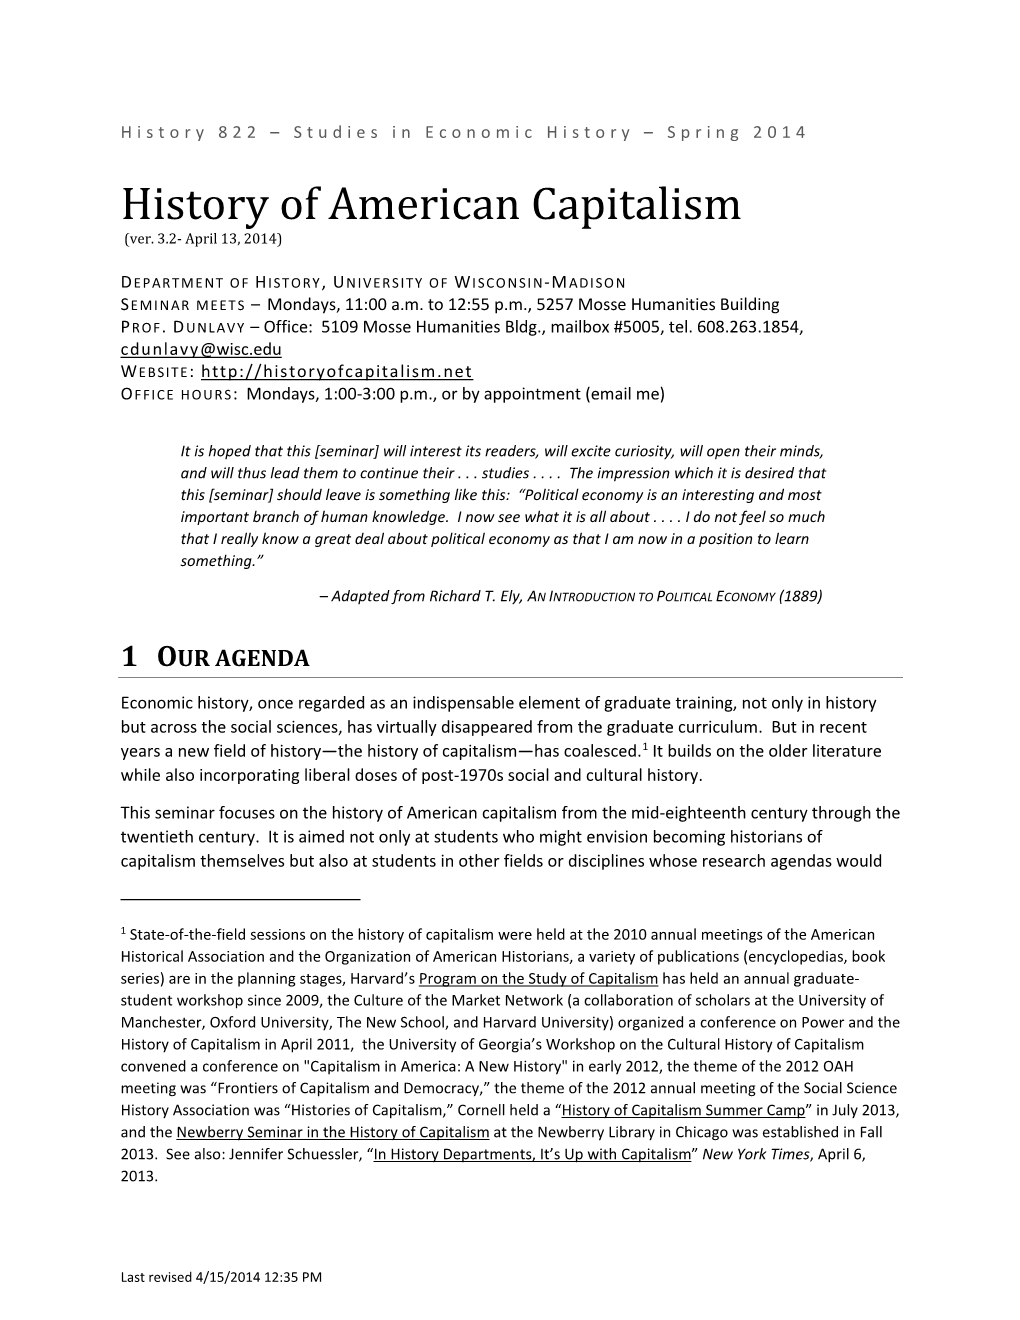 History of American Capitalism (Ver